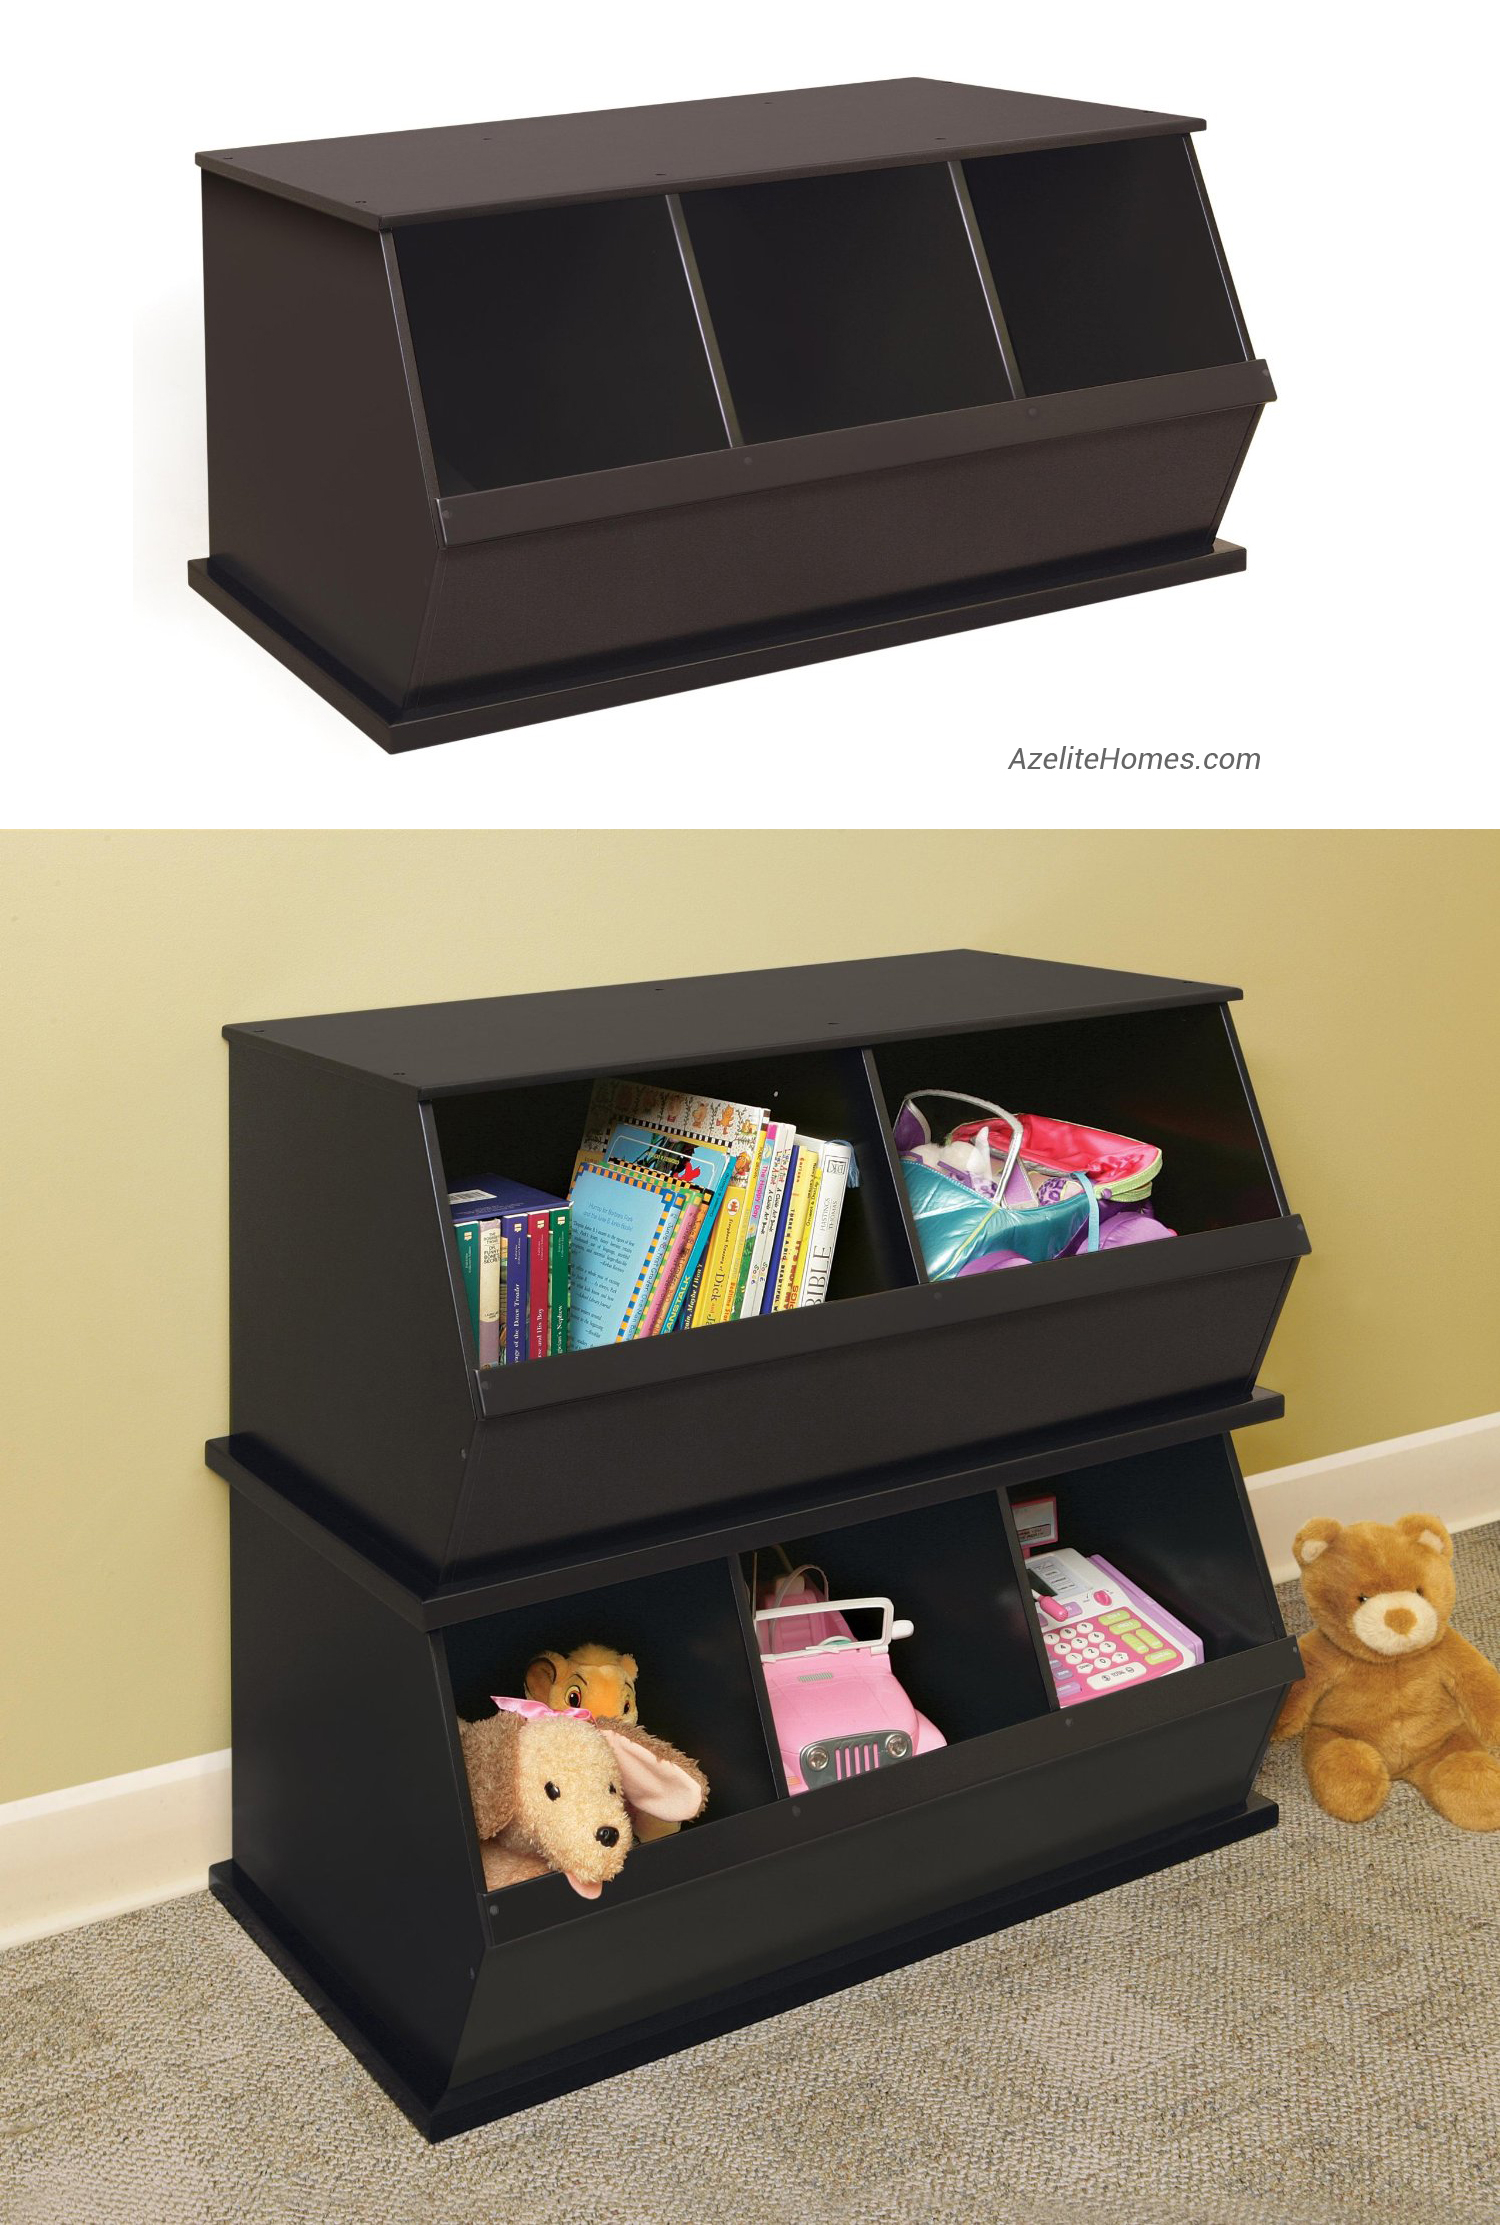 Stackable Wooden Toy Storage Units For Living Room With Three Bin pertaining to size 1500 X 2225